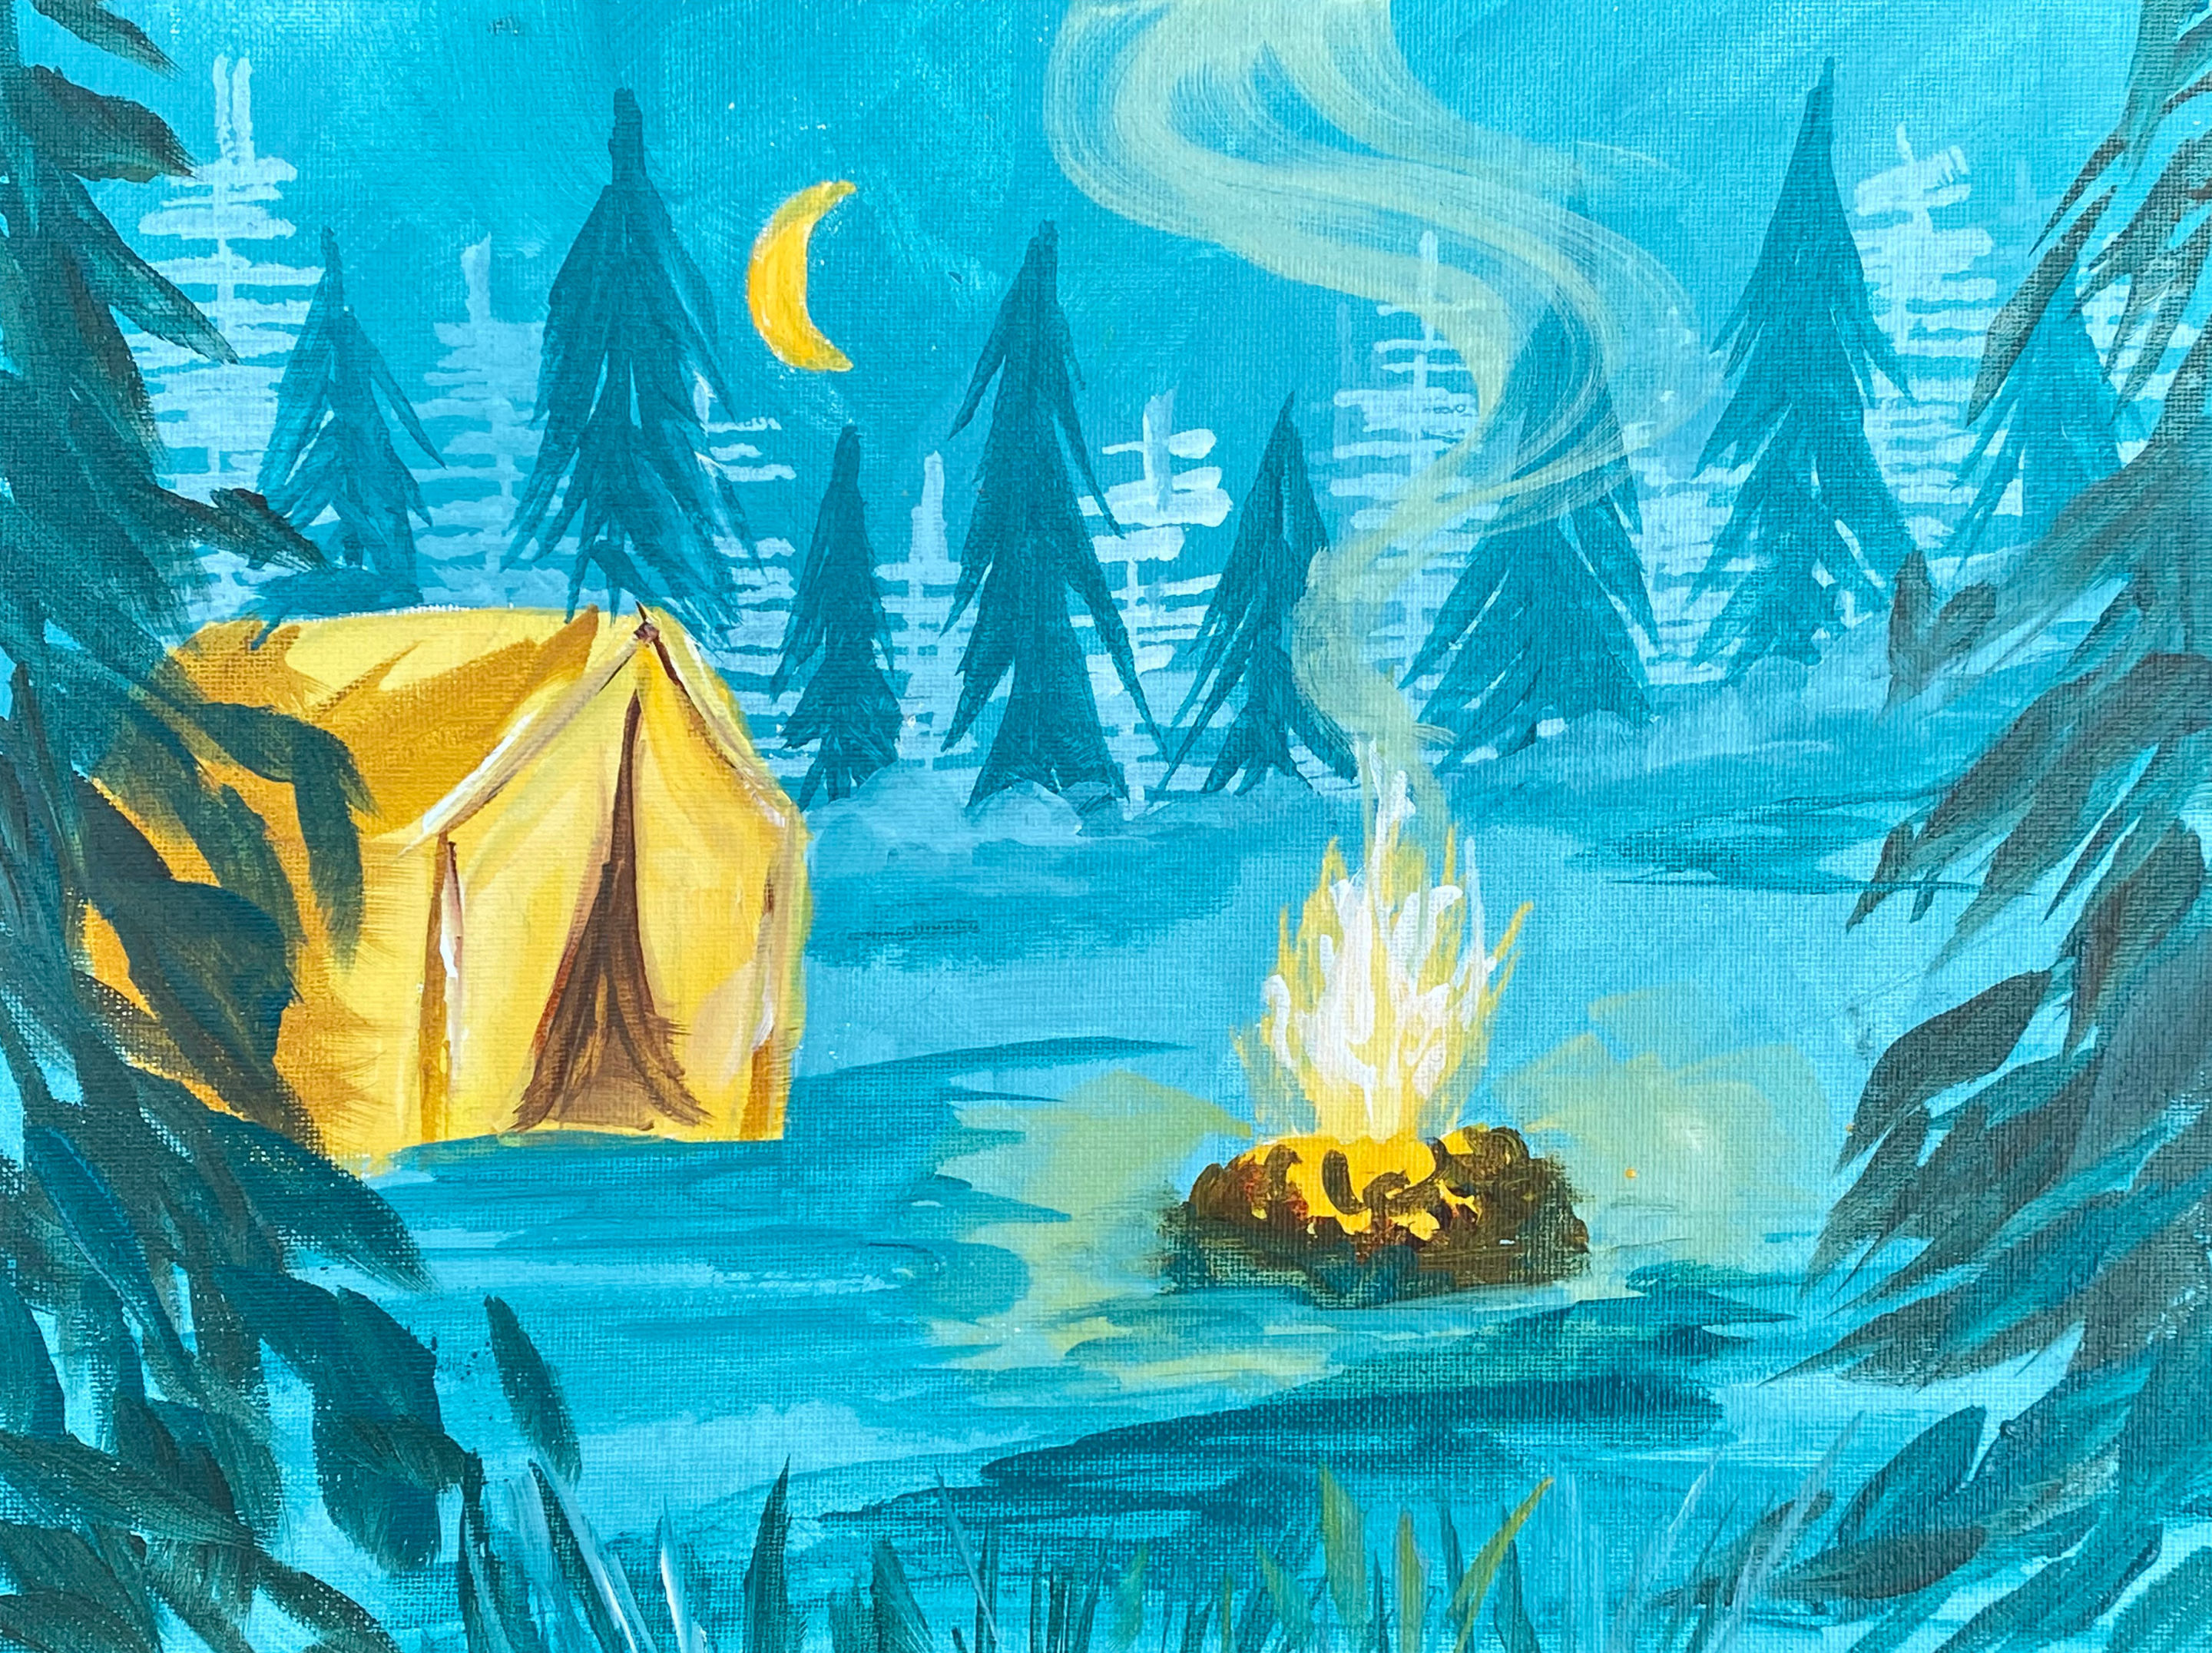 Turquoise Camping from Creatively Uncorked http://creativelyuncorked.com/